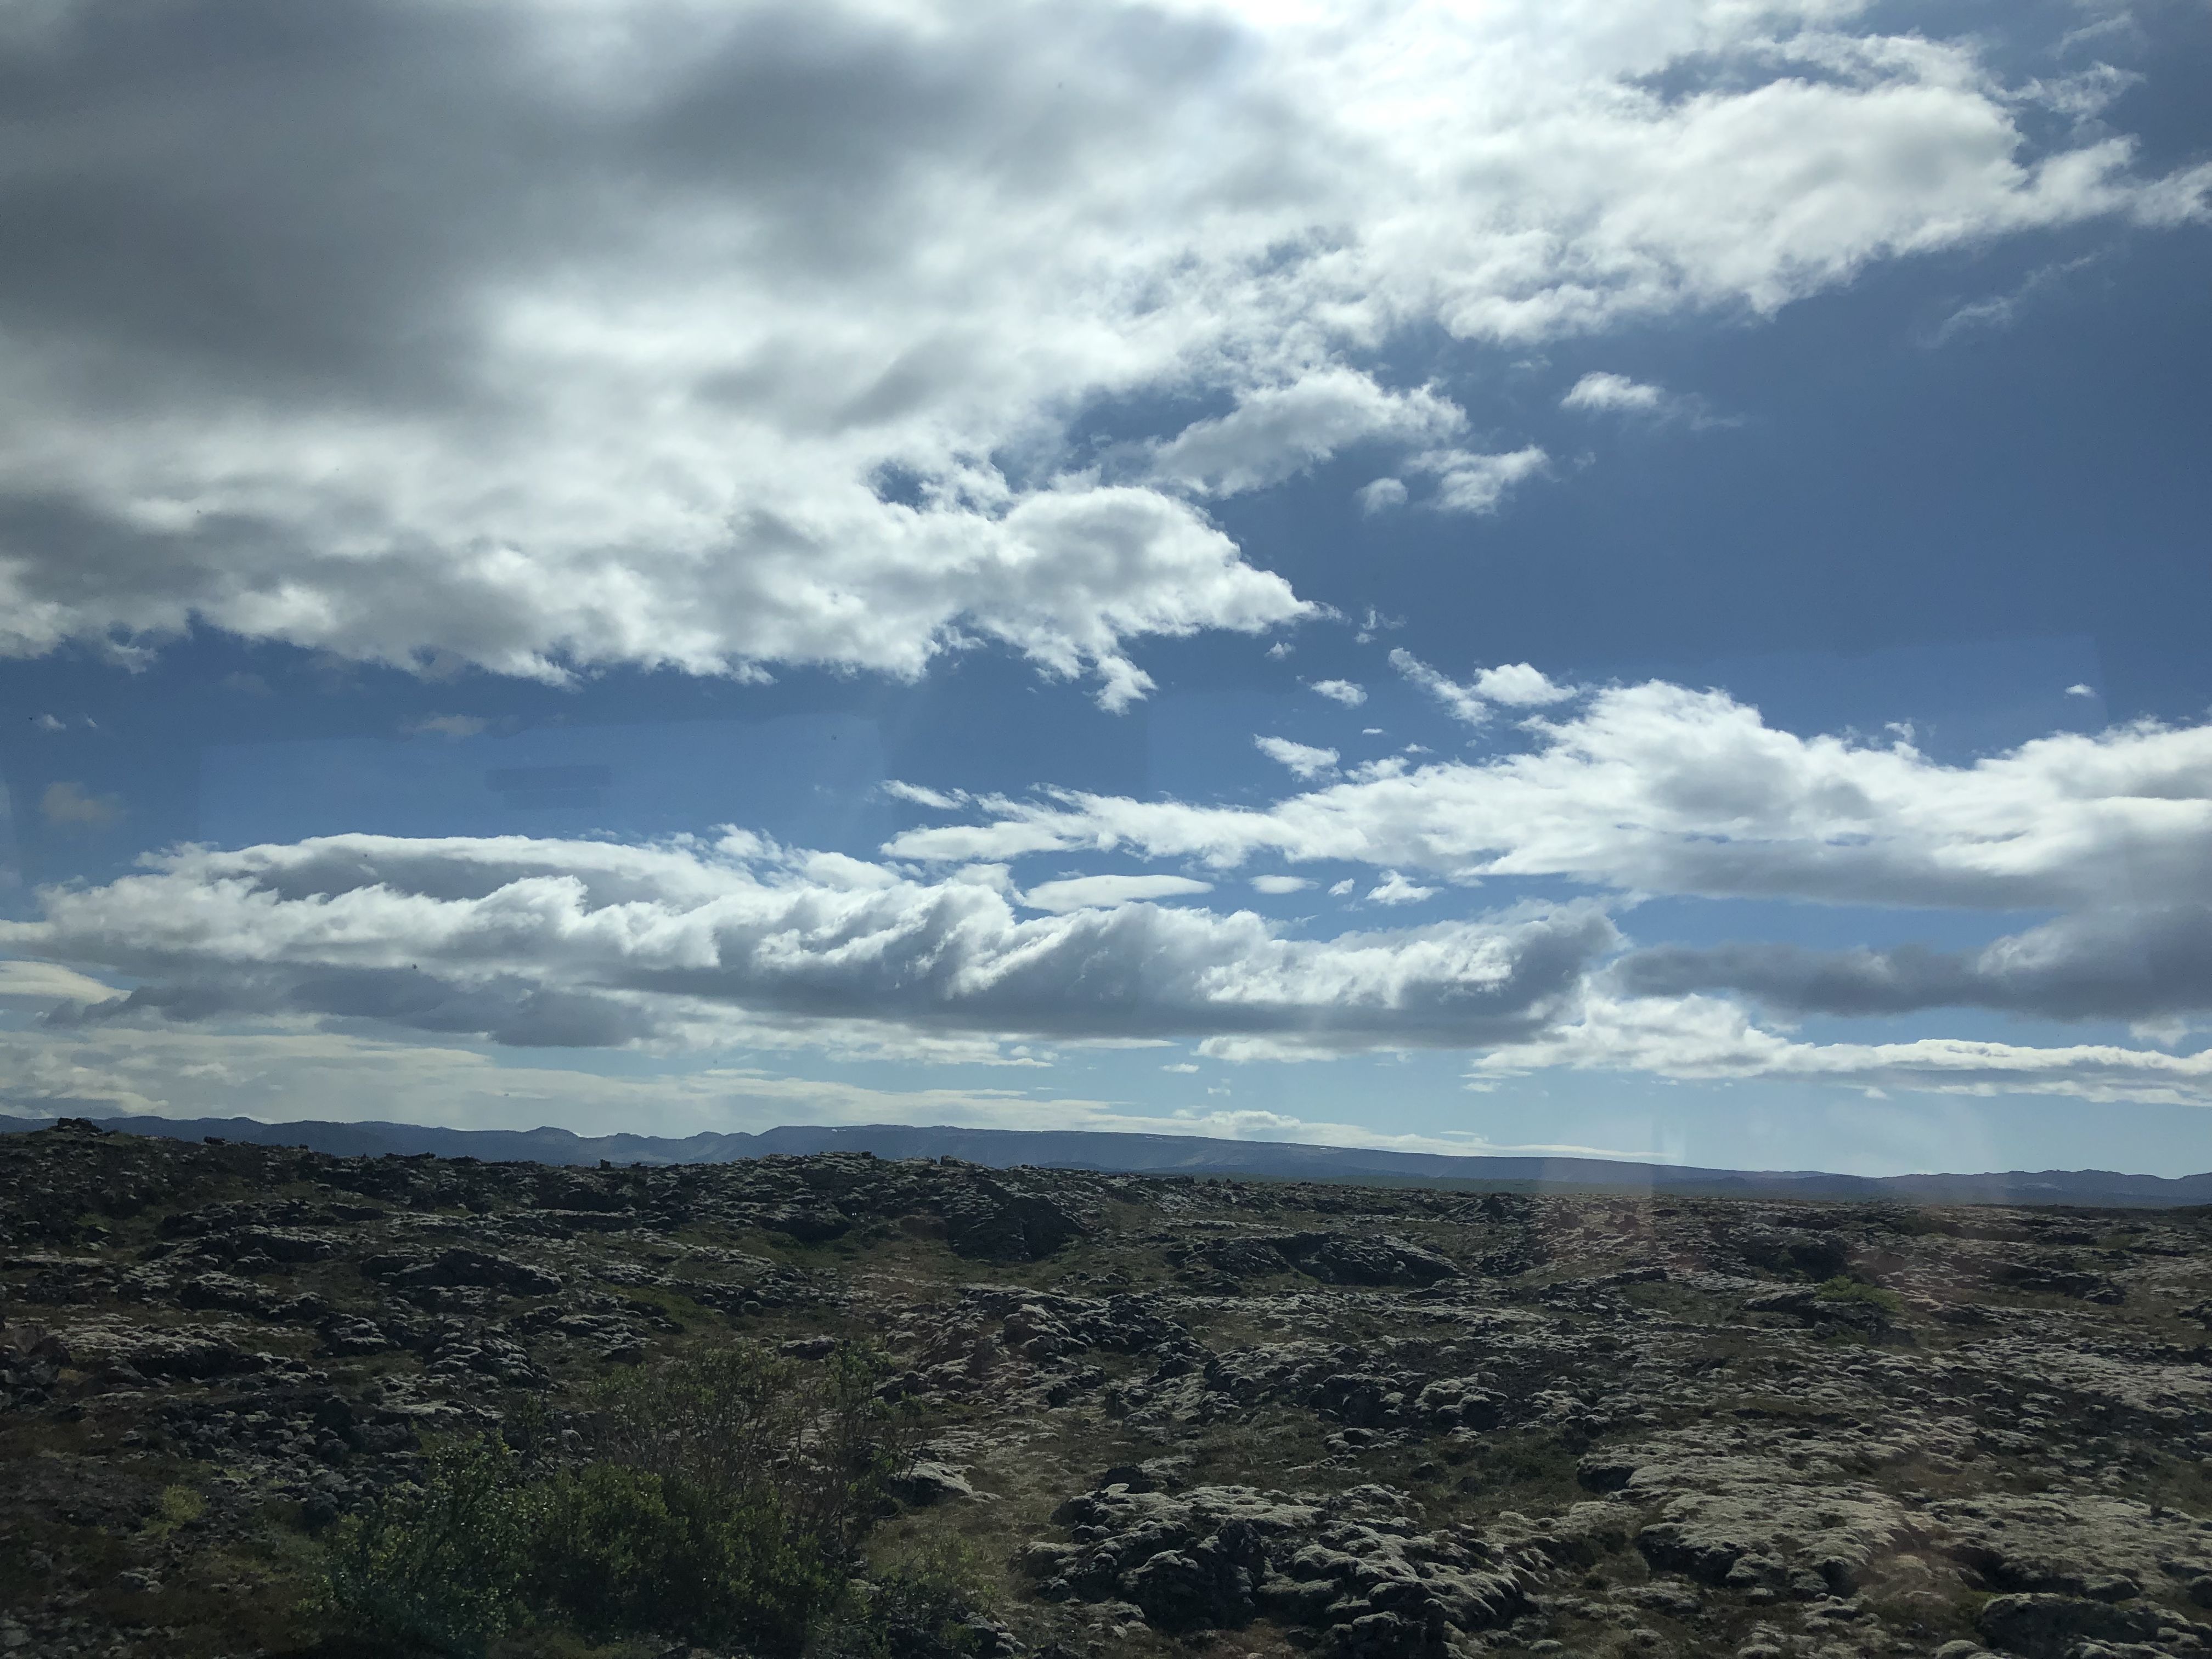 Image of Icelandic countryside on the route from the airport to Reykjavik. Rocky and blue skies